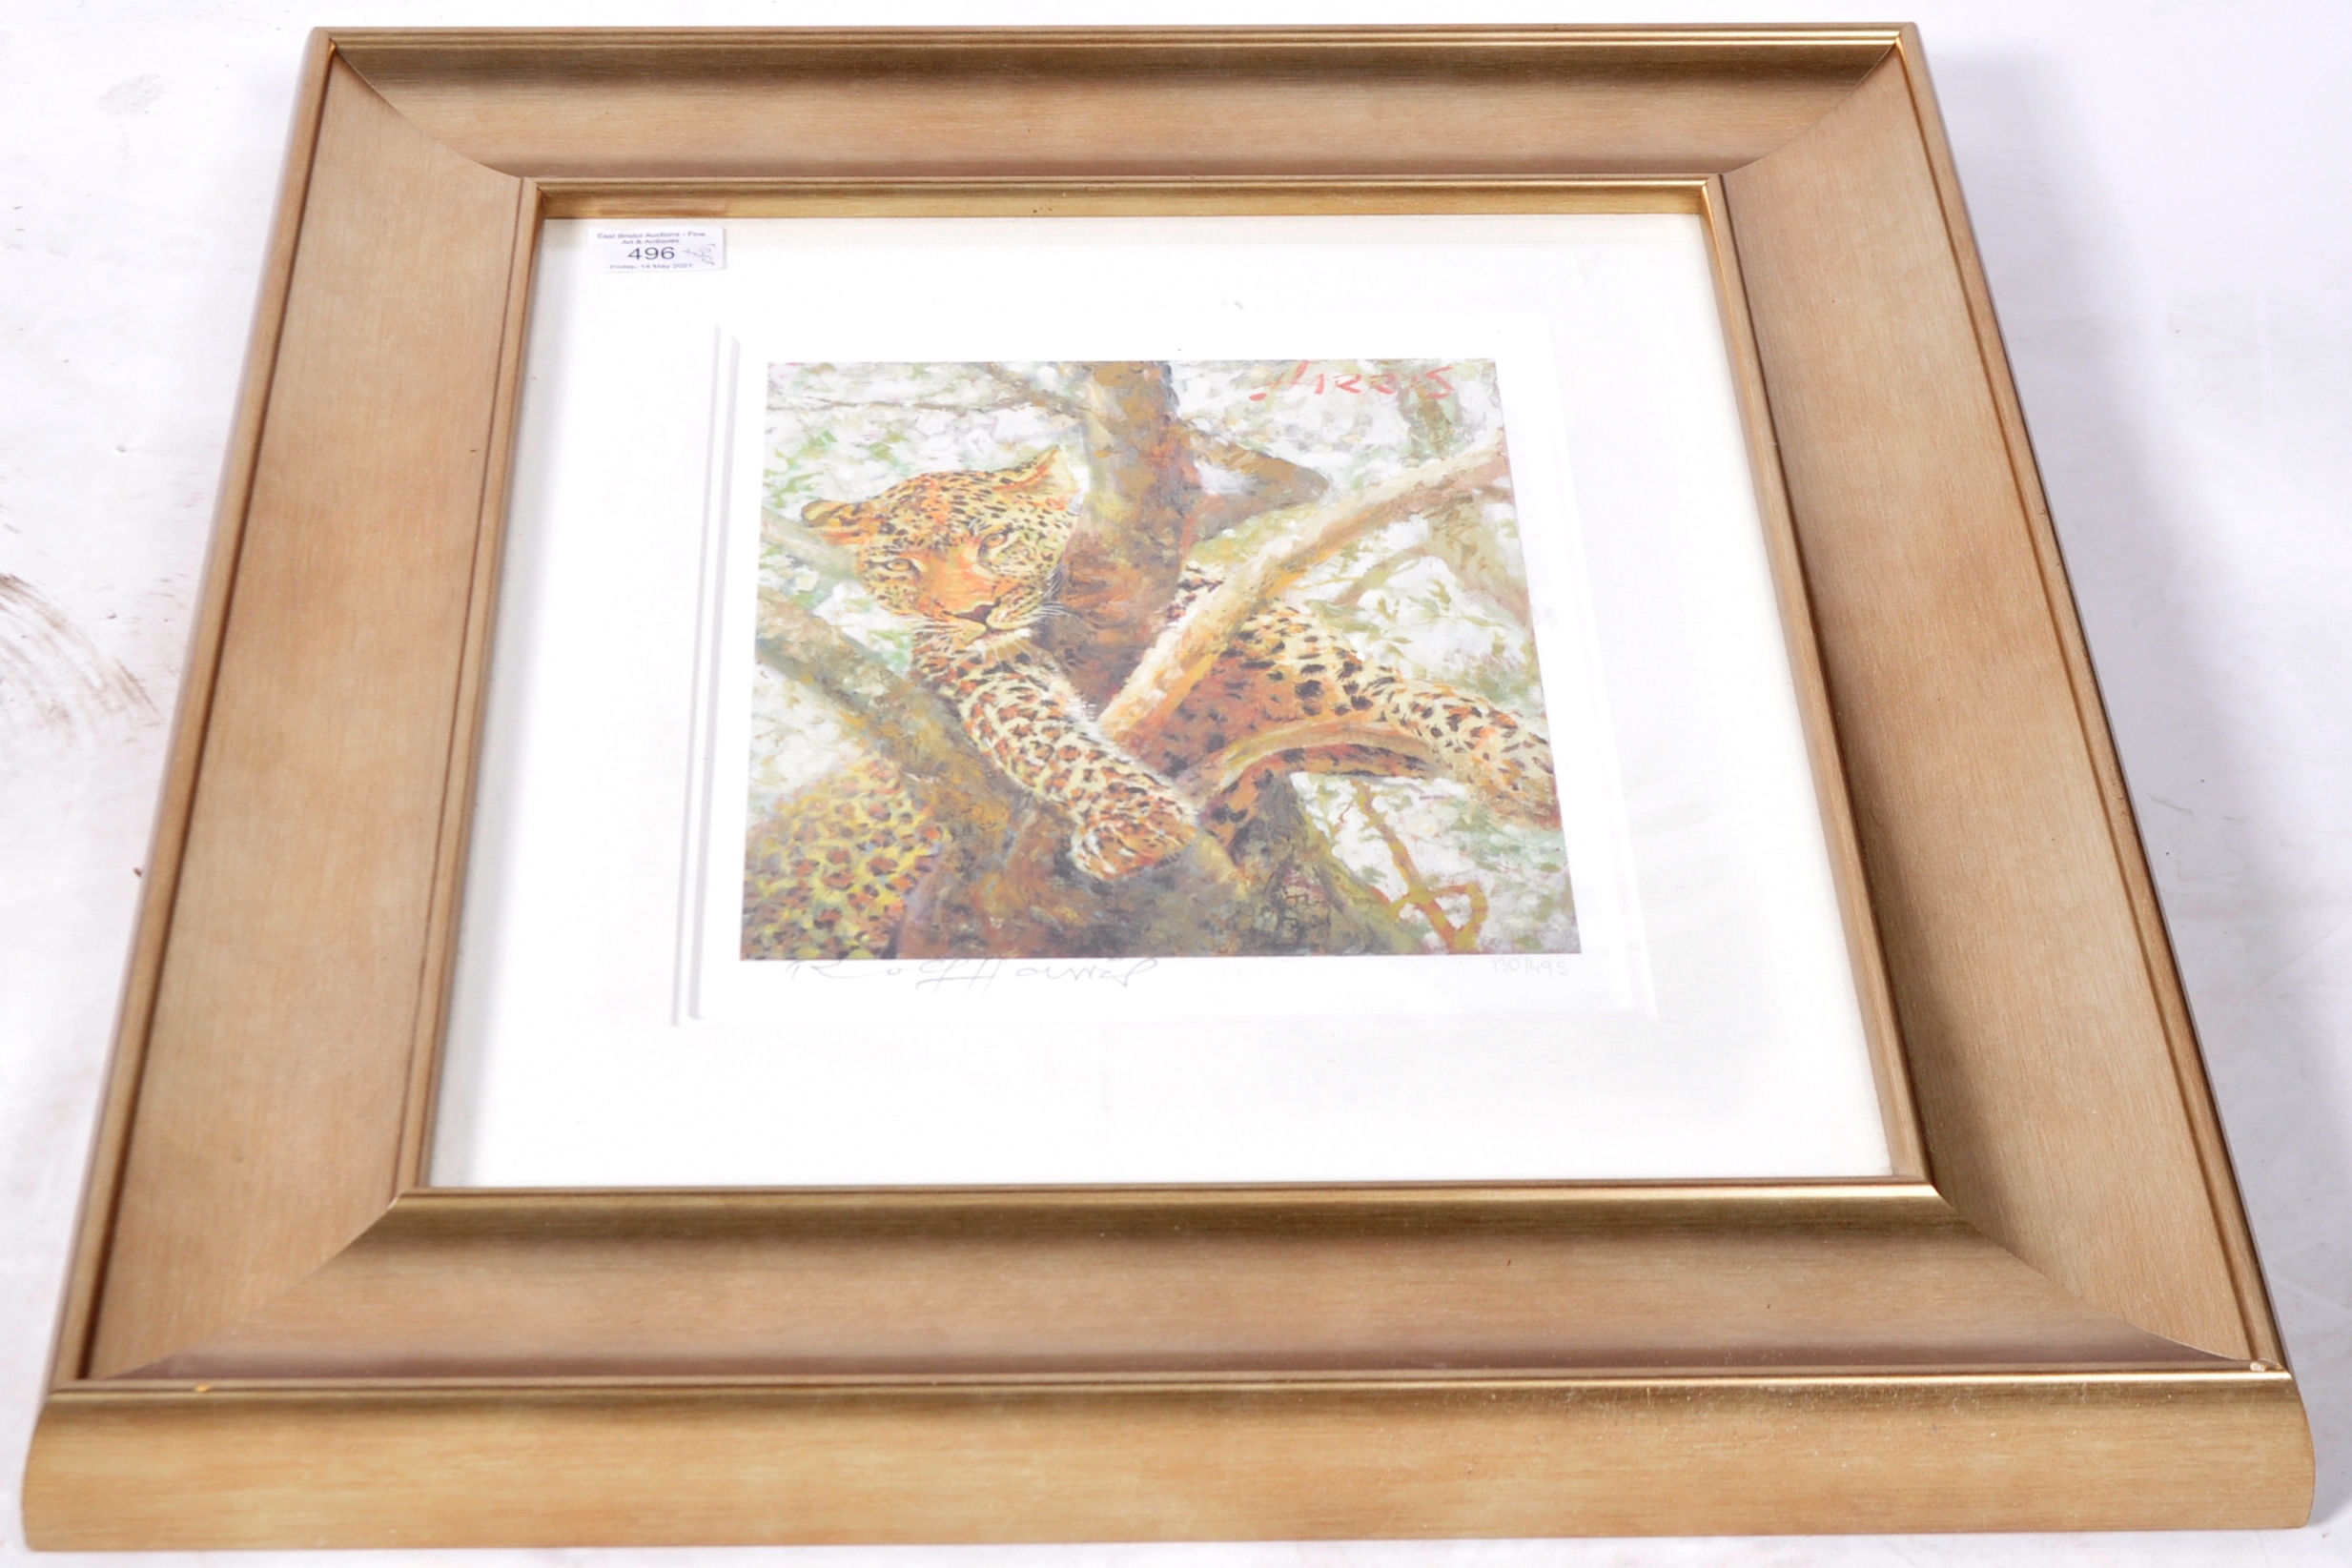 ROLF HARRIS - WORLD OF WILDLIFE SIGNED PRINT AND BOOKS - Image 7 of 8